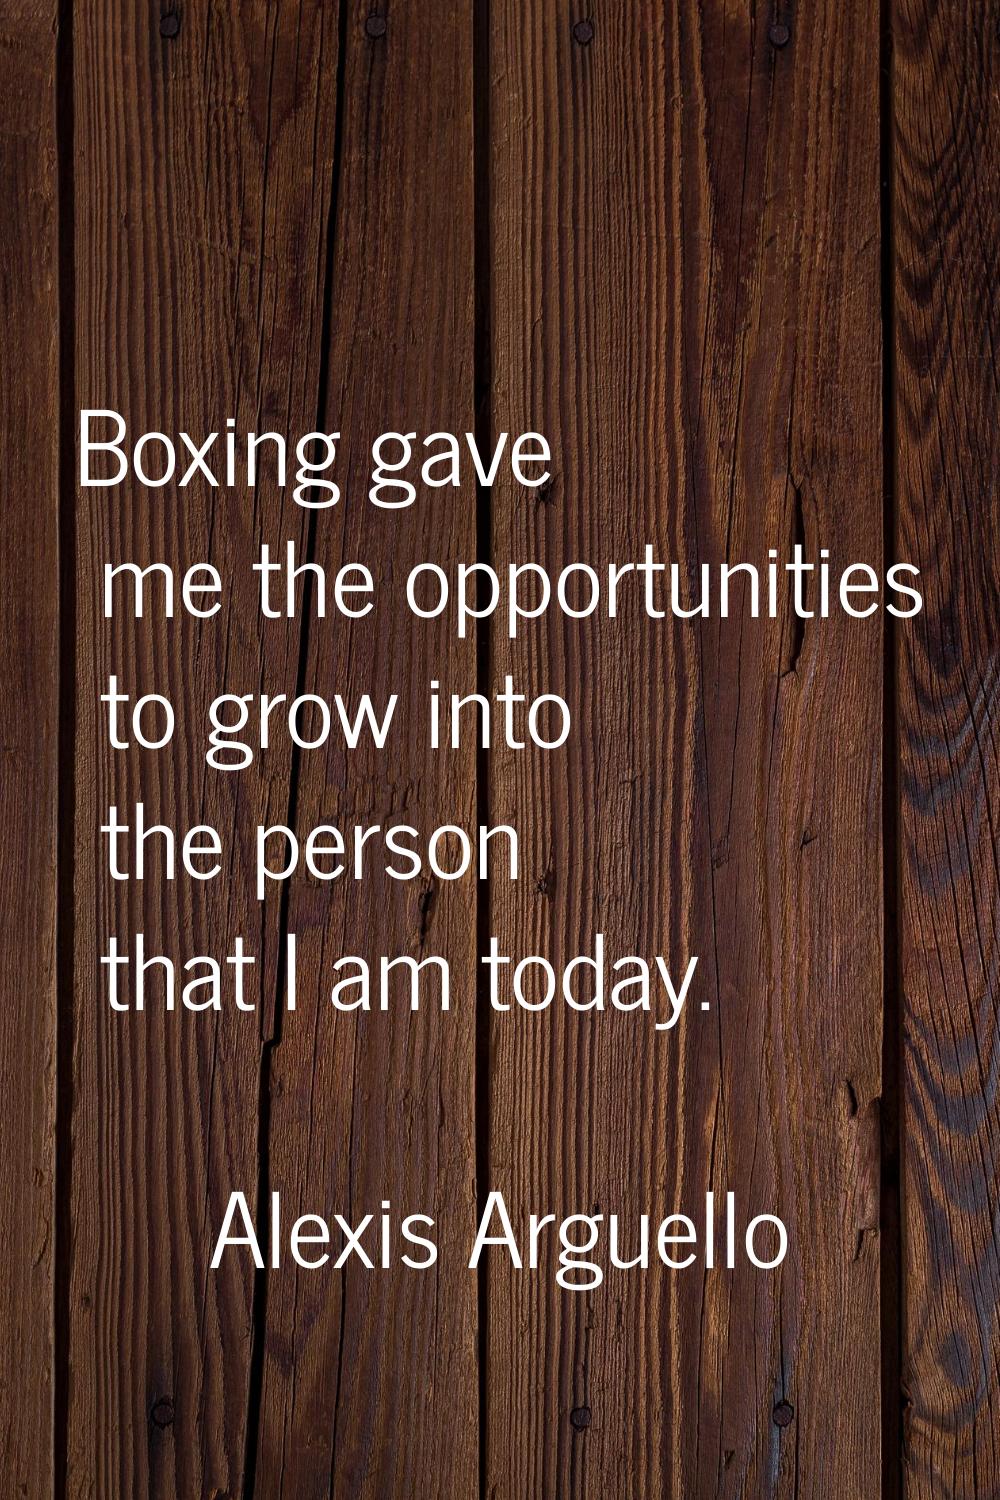 Boxing gave me the opportunities to grow into the person that I am today.